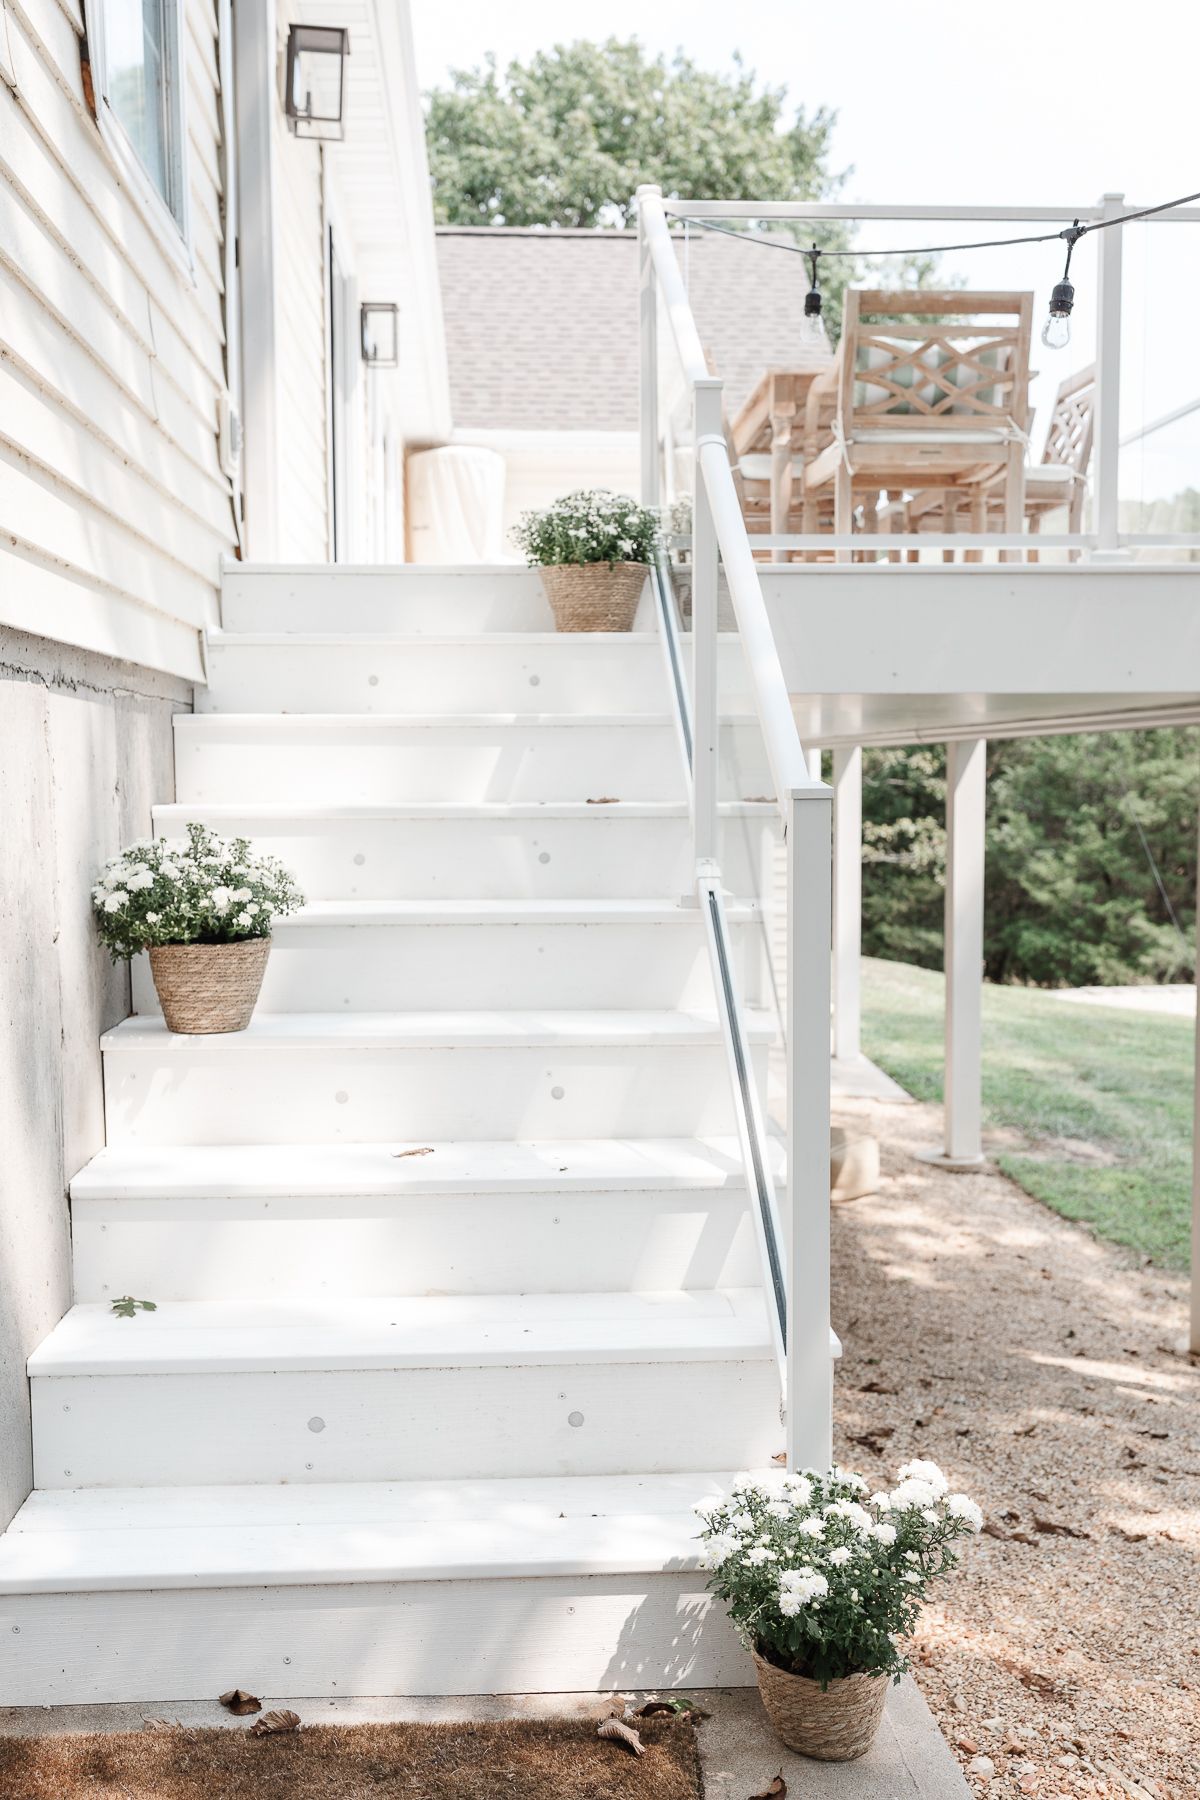 White vinyl deck staircase with discreet deck lighting on every other step.